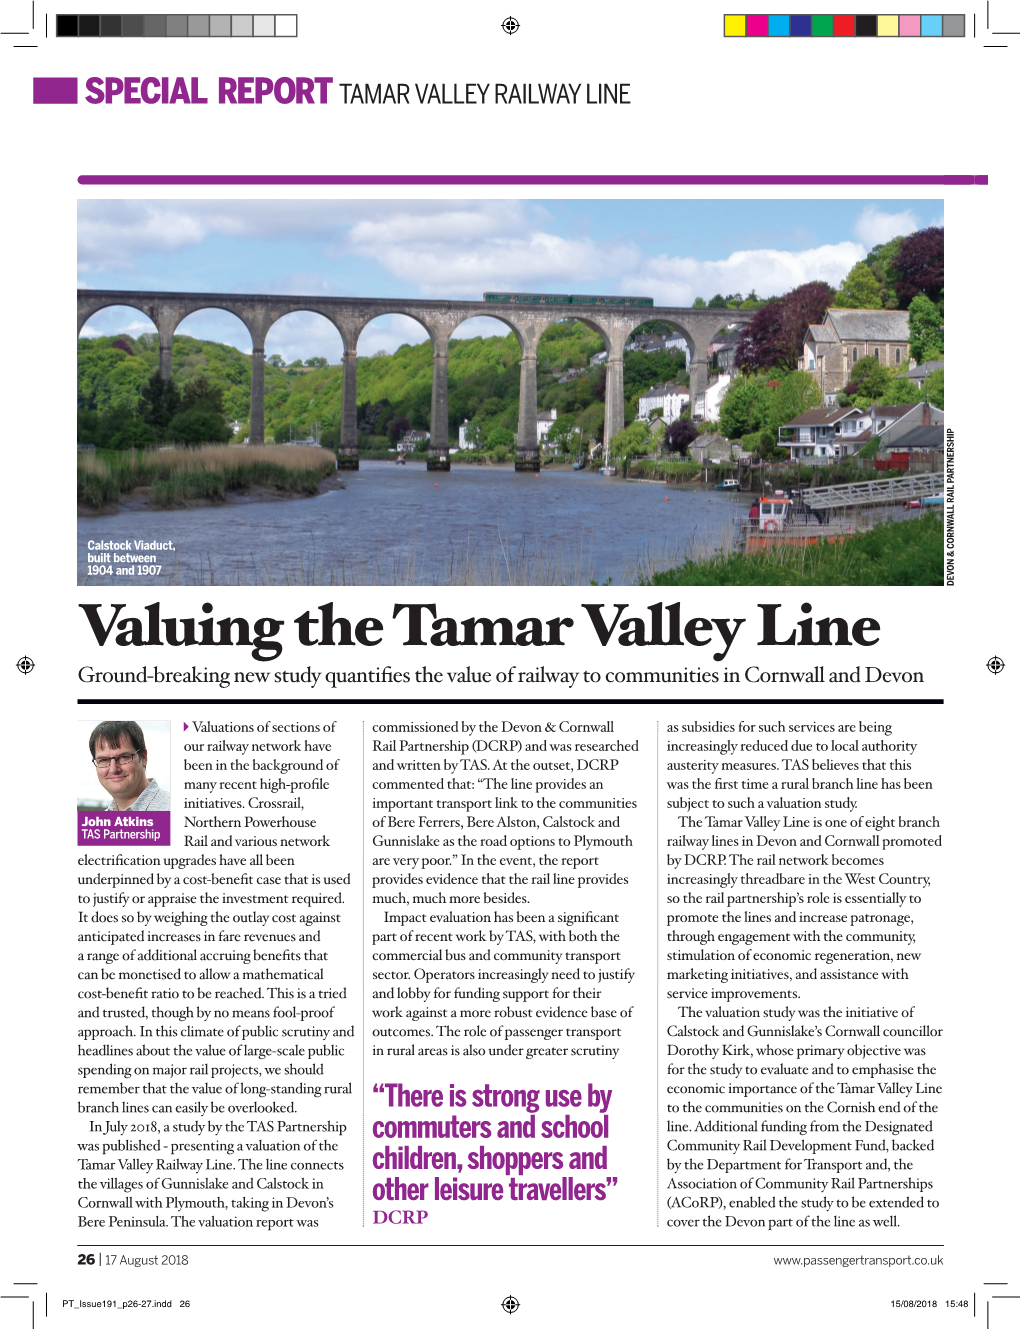 Valuing the Tamar Valley Line Ground-Breaking New Study Quantifies the Value of Railway to Communities in Cornwall and Devon